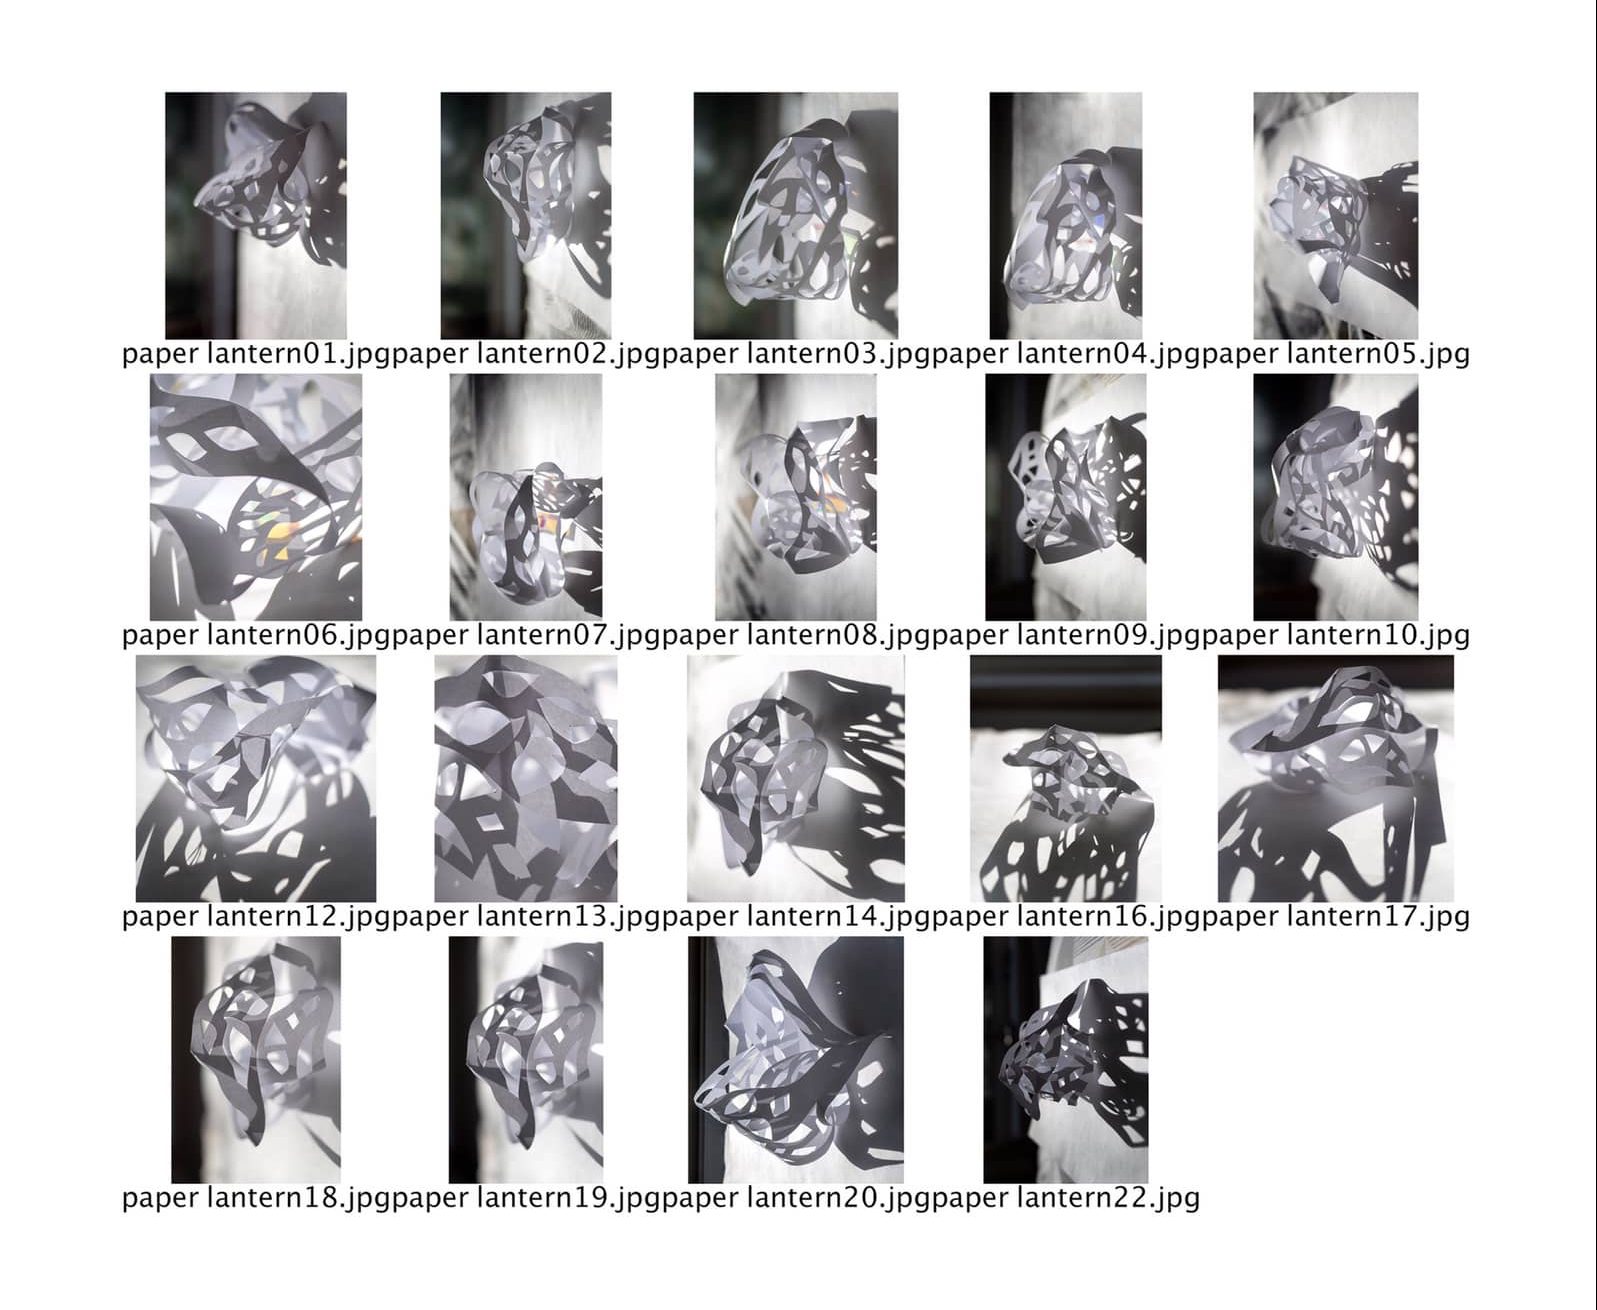 A Contact sheet of paper lantern images